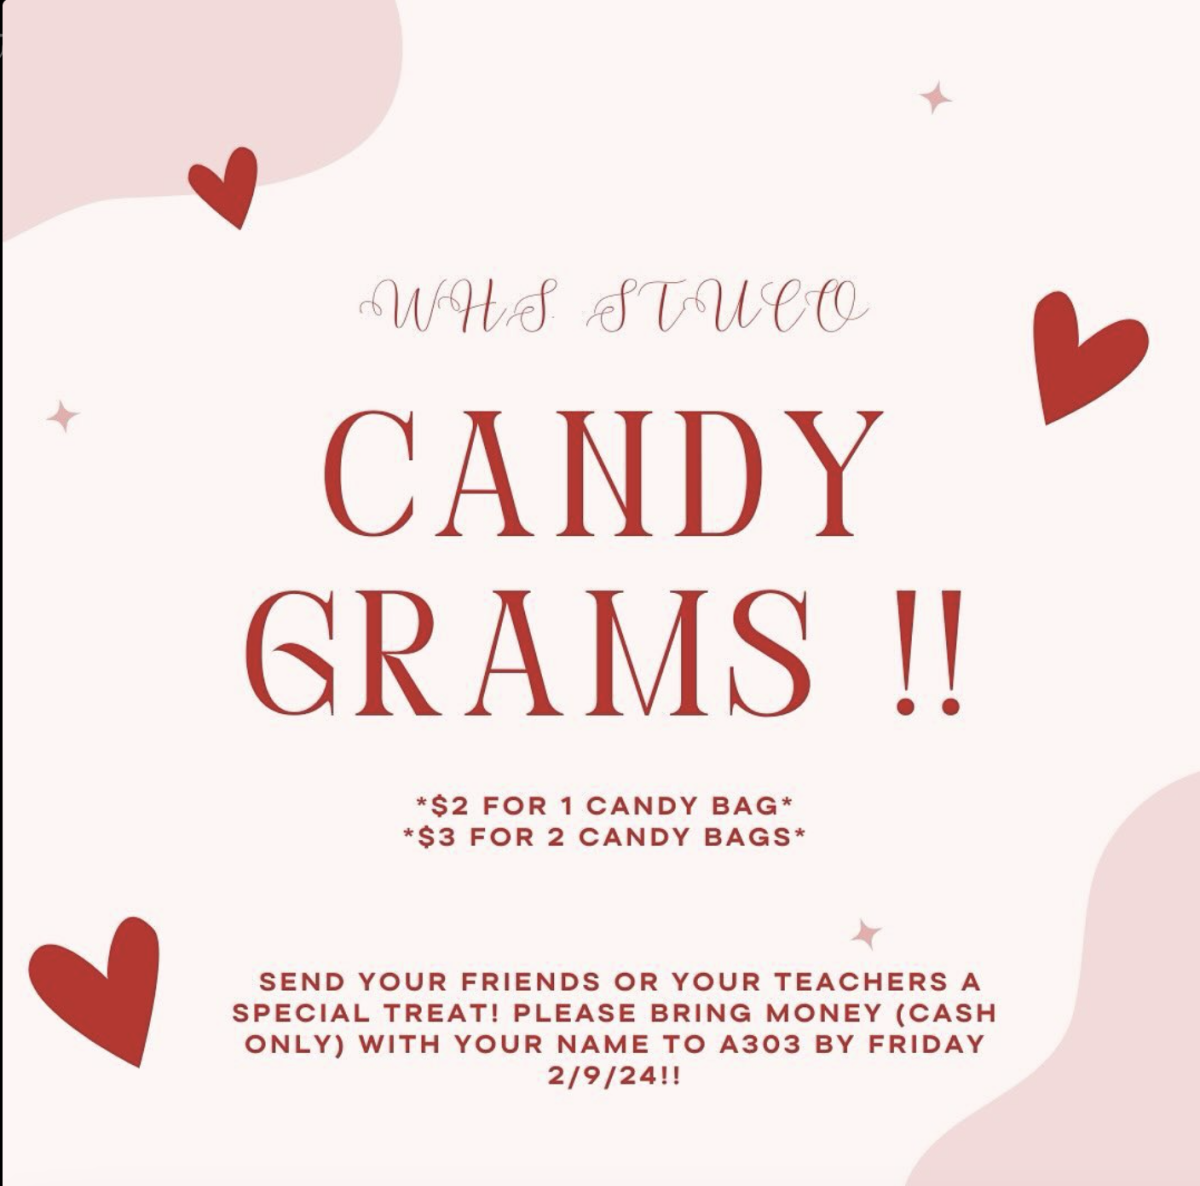 Student+Council+Valentines+Day+Candy+Grams